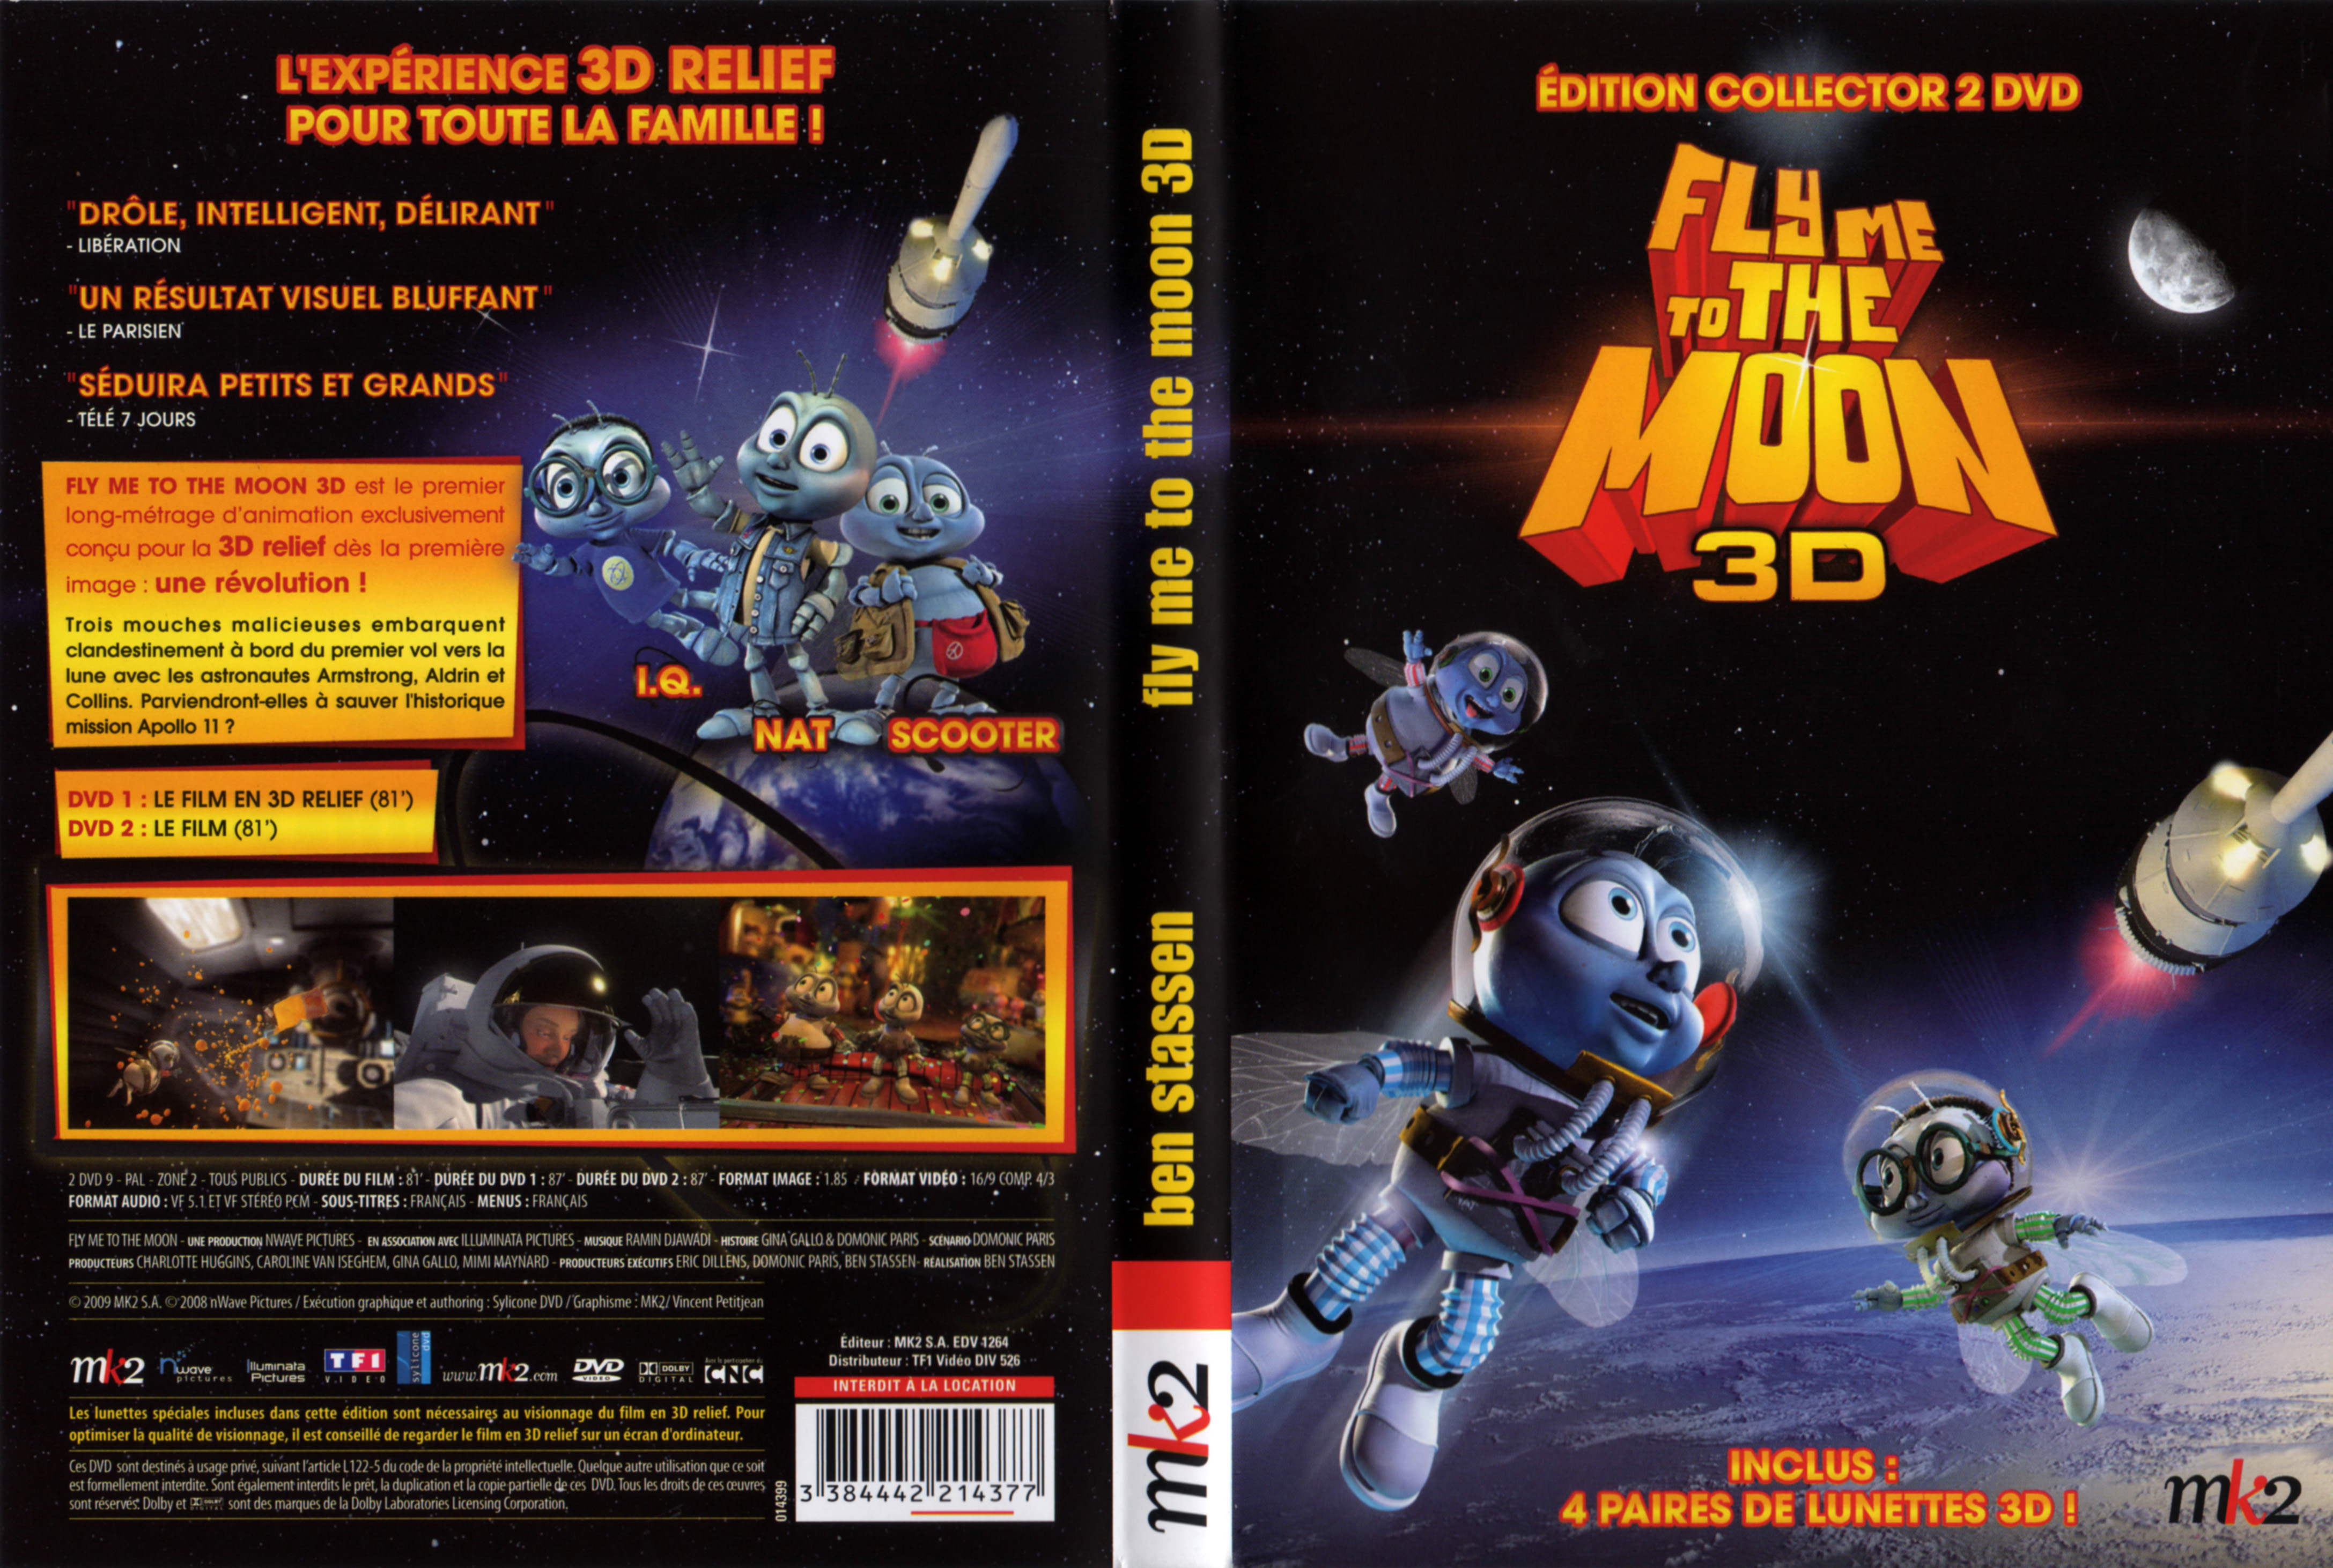 Jaquette DVD Fly me to the moon 3D